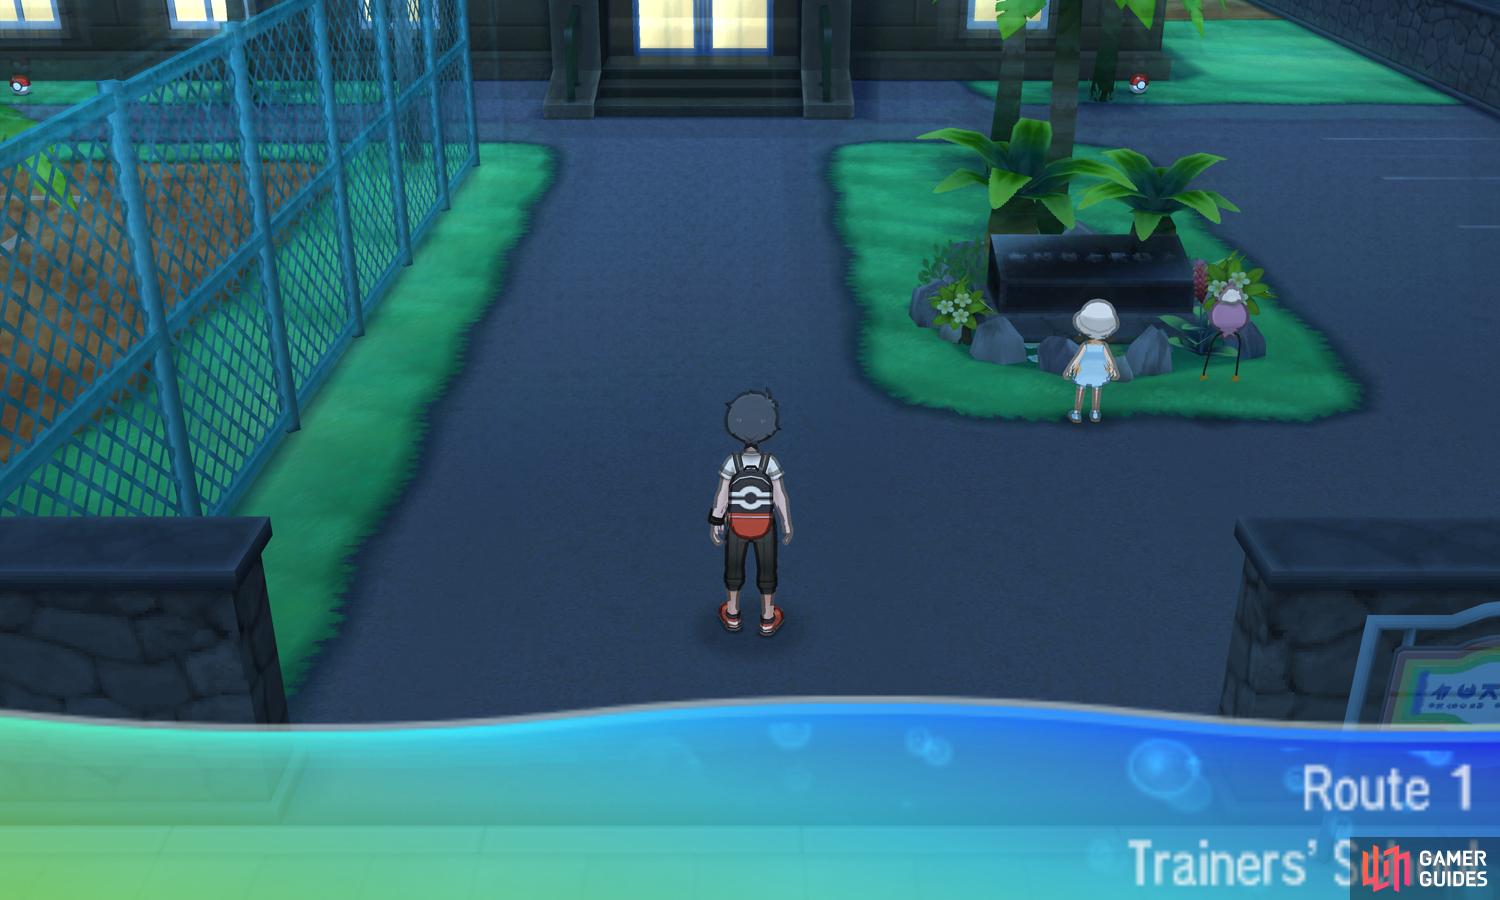  Pokémon Ultra Sun & Moon Collection Guide - How to win